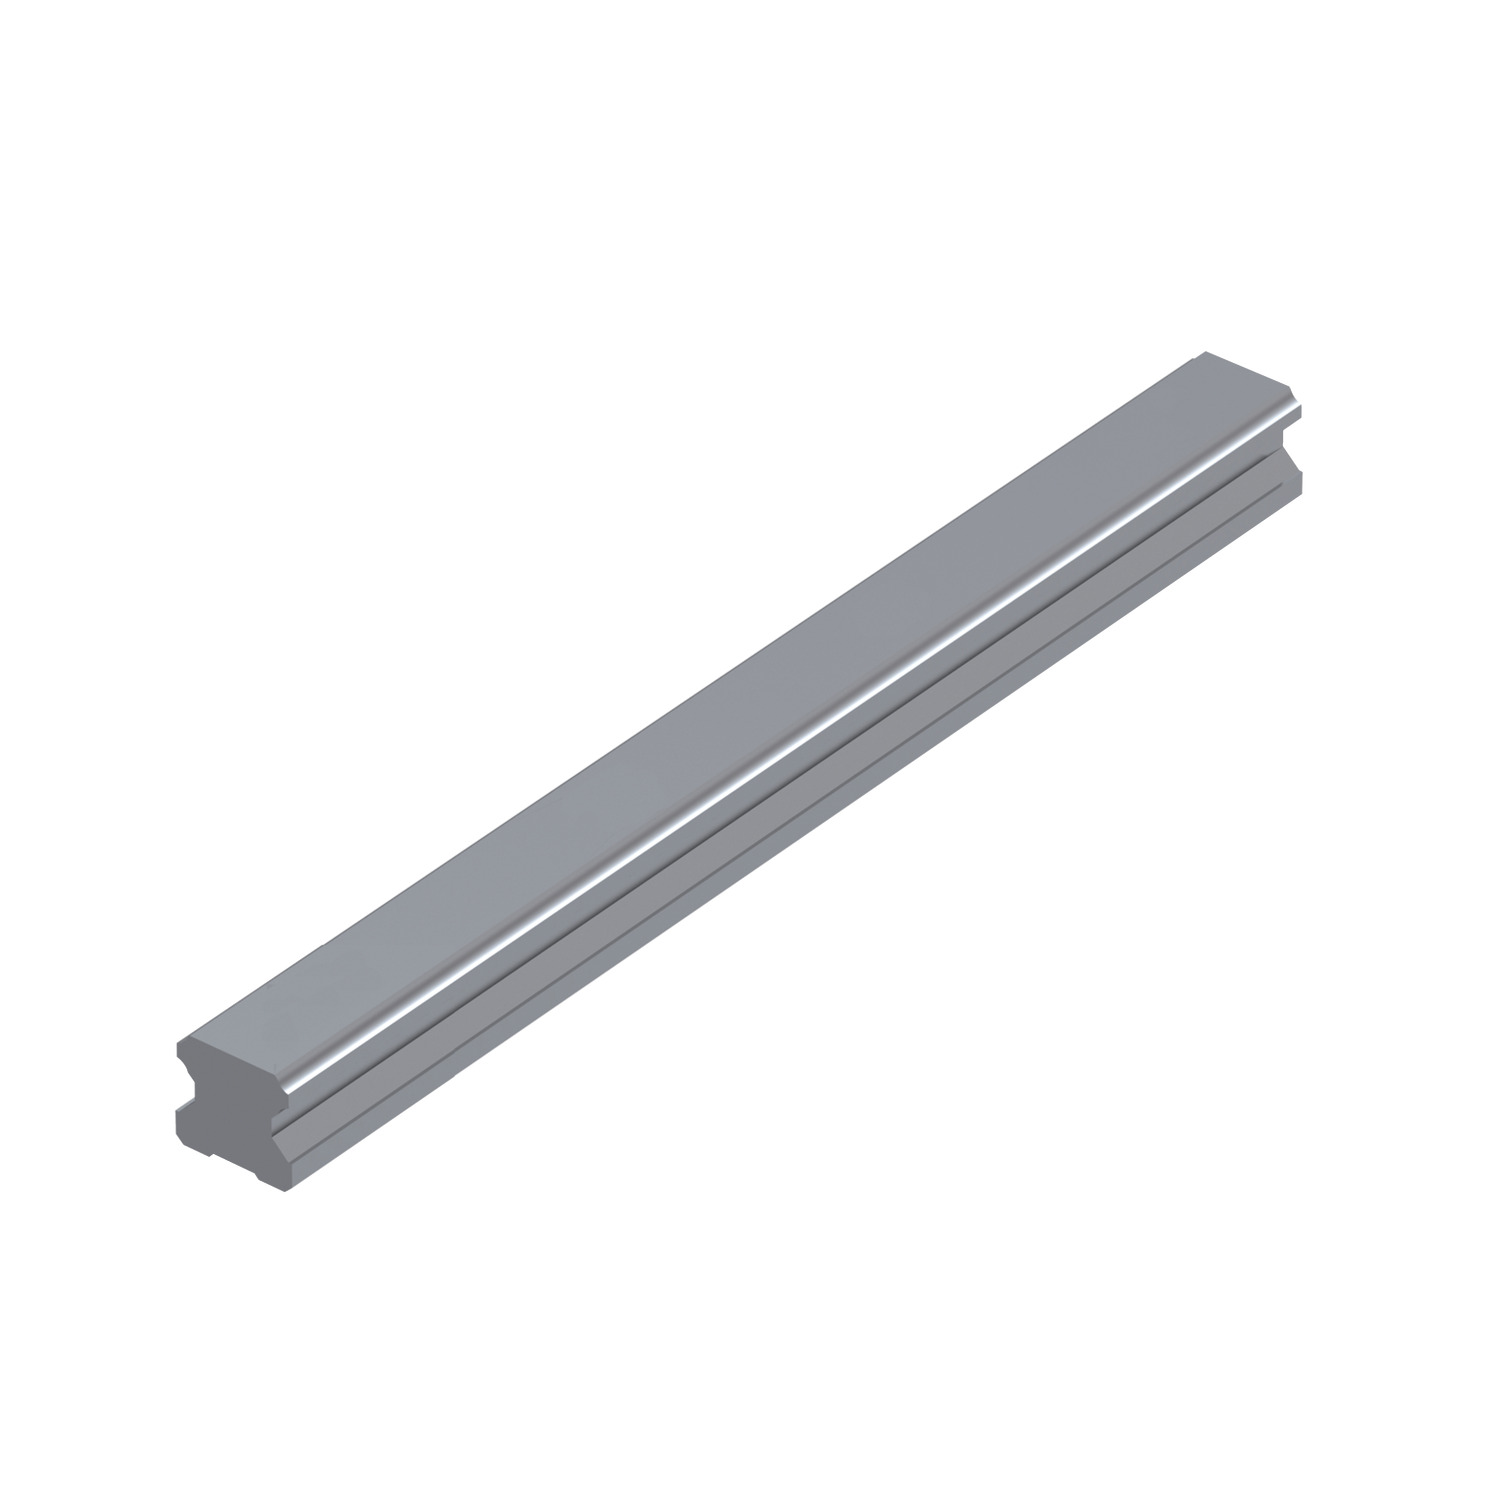 L1016.RF15-1900 Linear guide rail rear fixing 15mm 1900 Hardened and ground steel. EC:20166311 WG:05063055294966